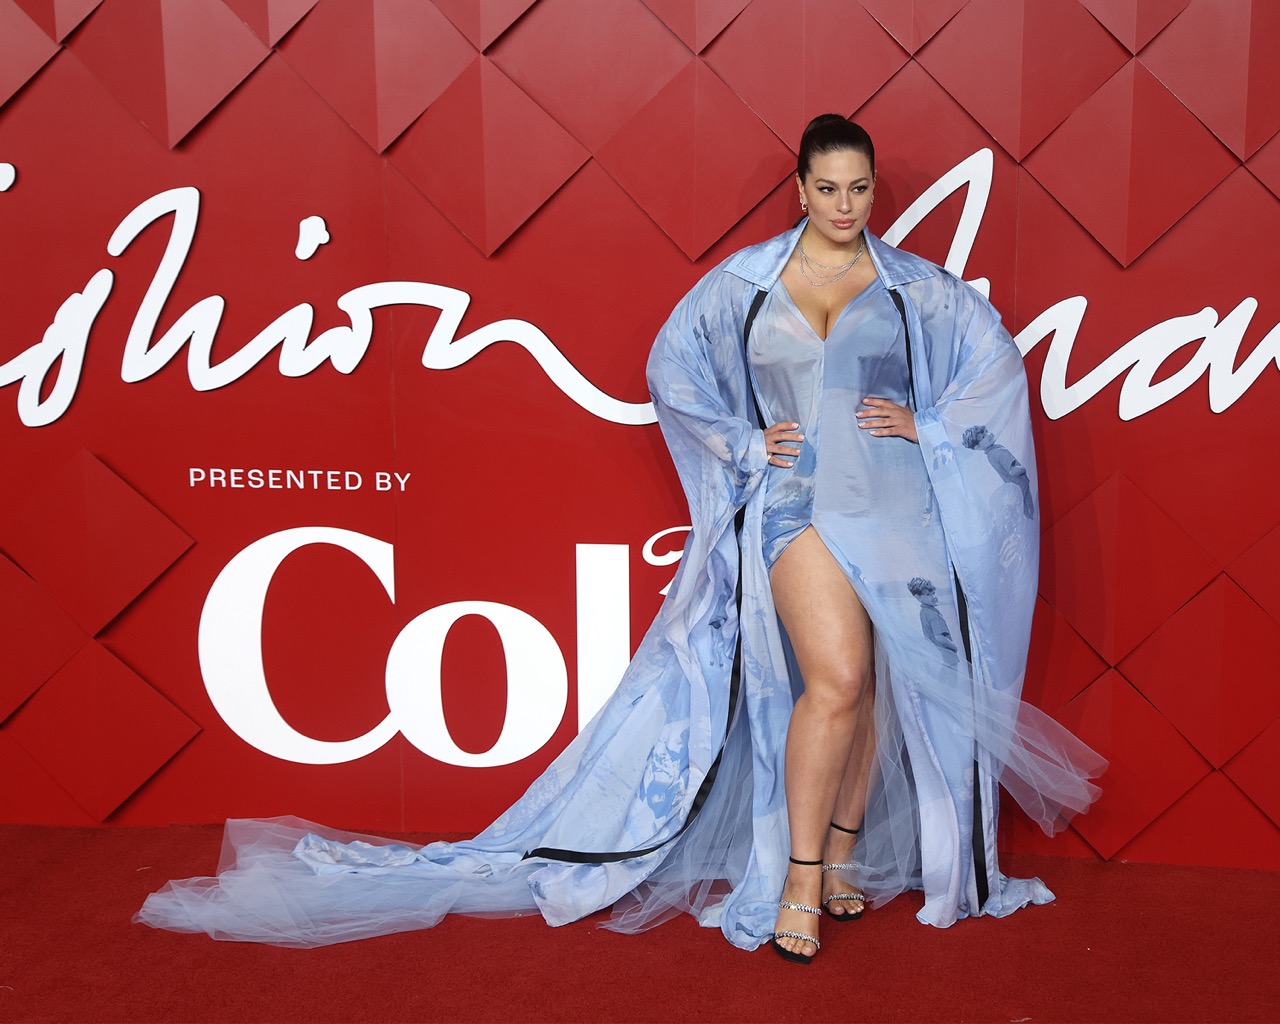  LONDON, ENGLAND - DECEMBER 05: Ashley Graham attends The Fashion Awards 2022 at the Royal Albert Hall on December 05, 2022 in London, England. (Photo by Neil Mockford/FilmMagic)